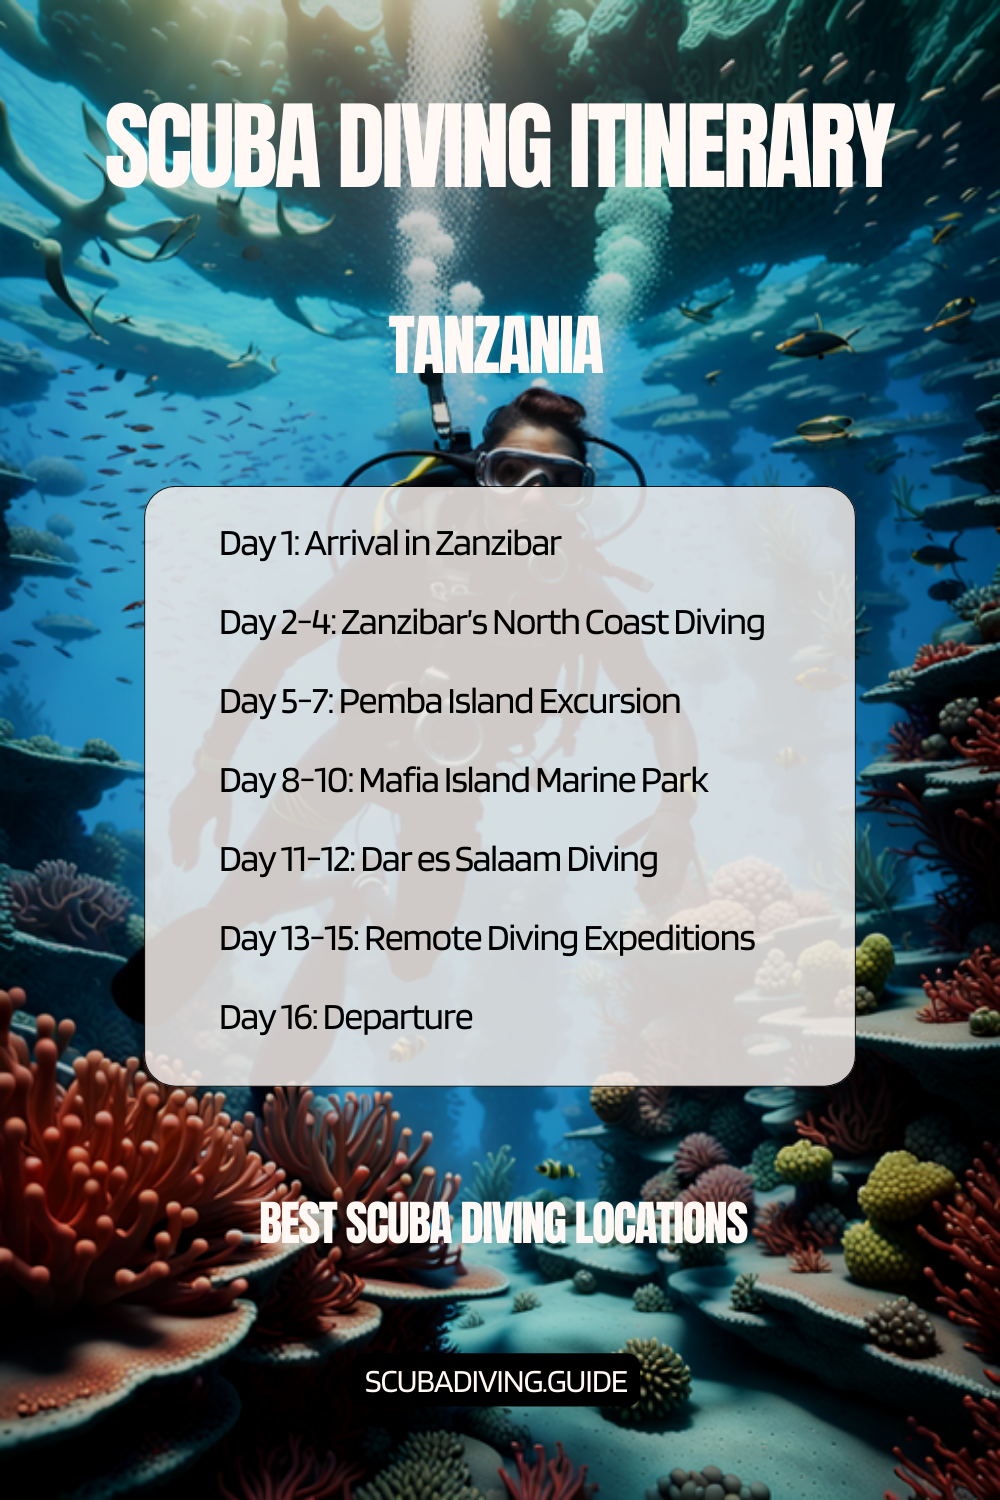 Tanzania Recommended Scuba Diving Itinerary